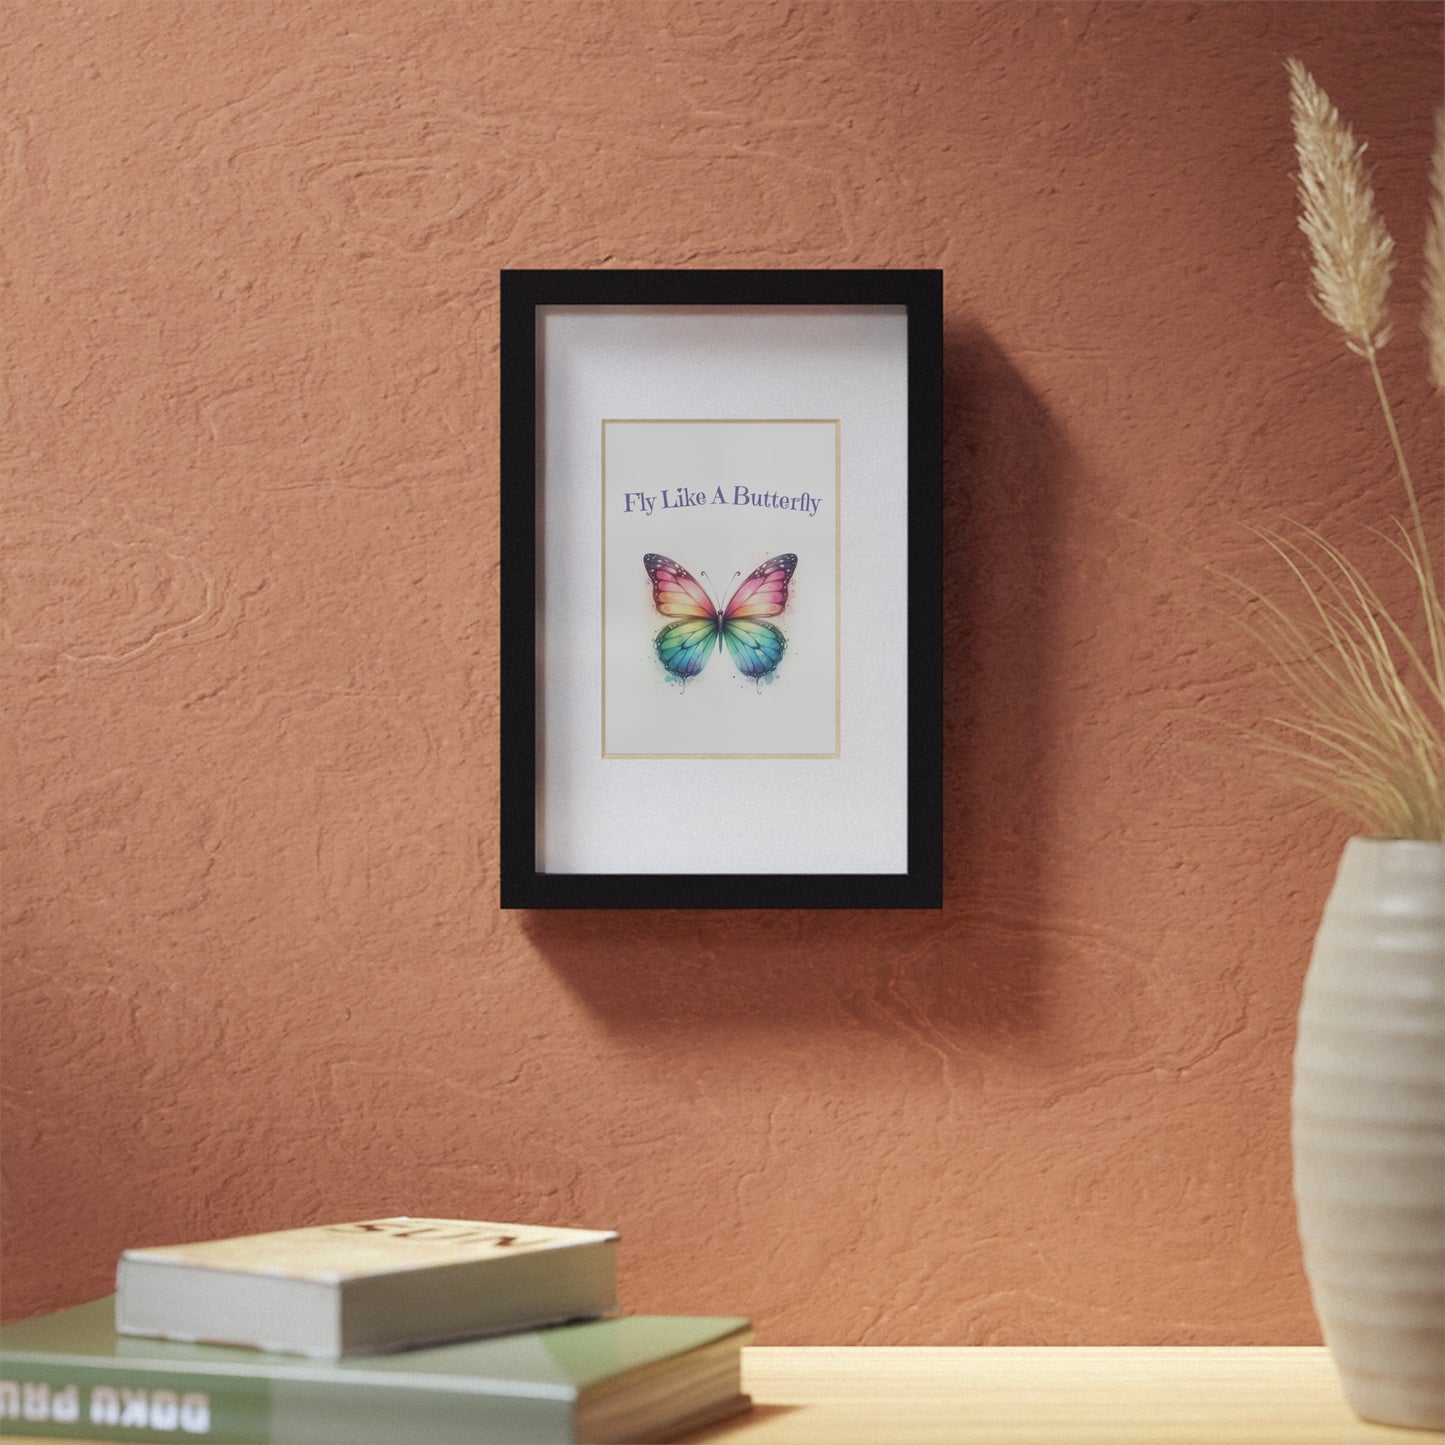 Fly Like A Butterfly - Purple Print with Frame